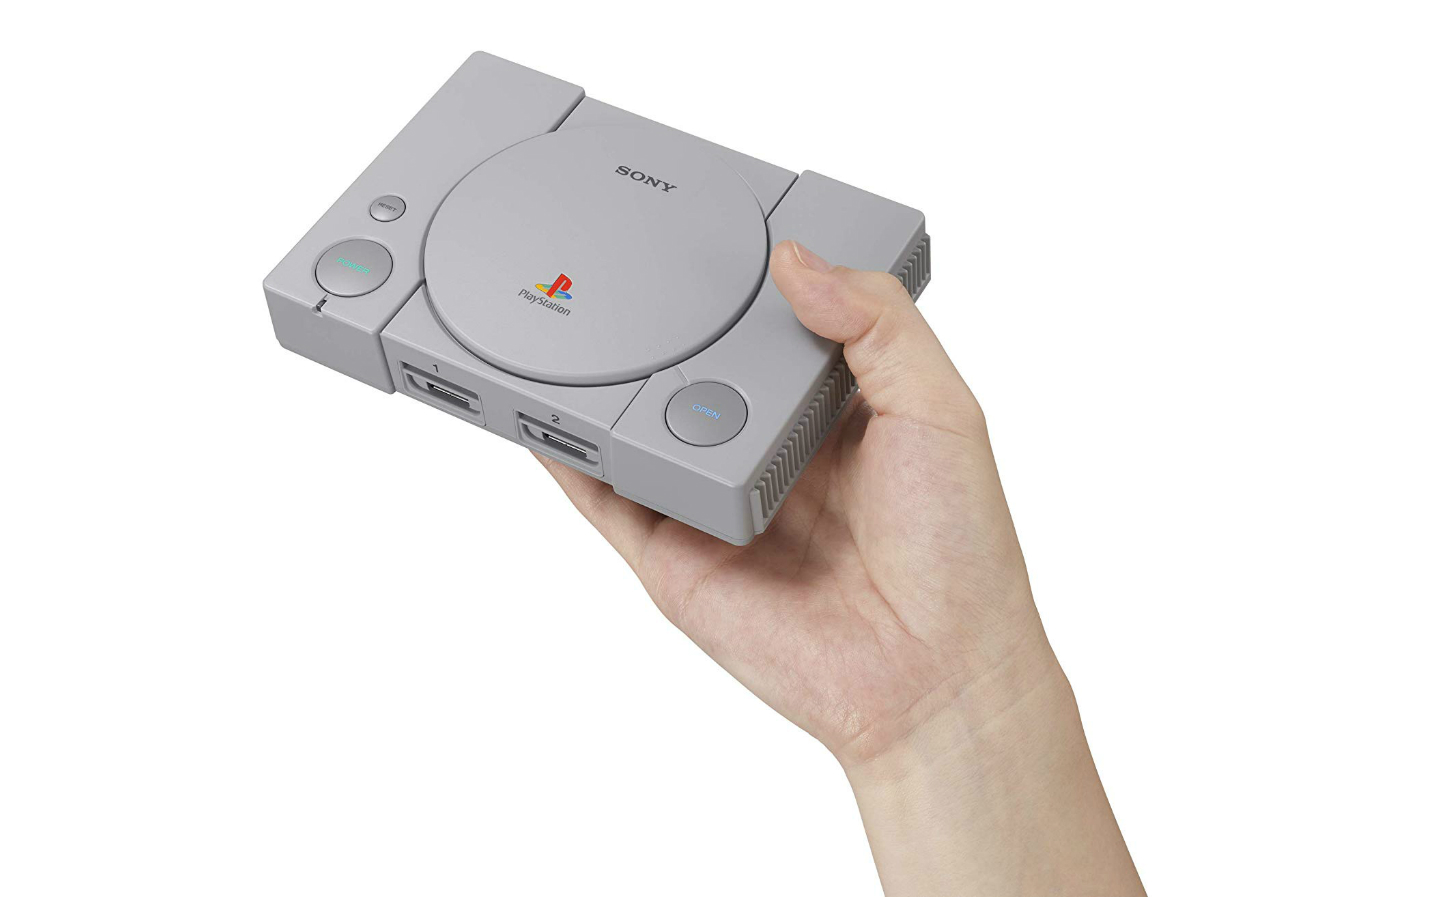 2018 Christmas gift guide for car fans: PlayStation Classic